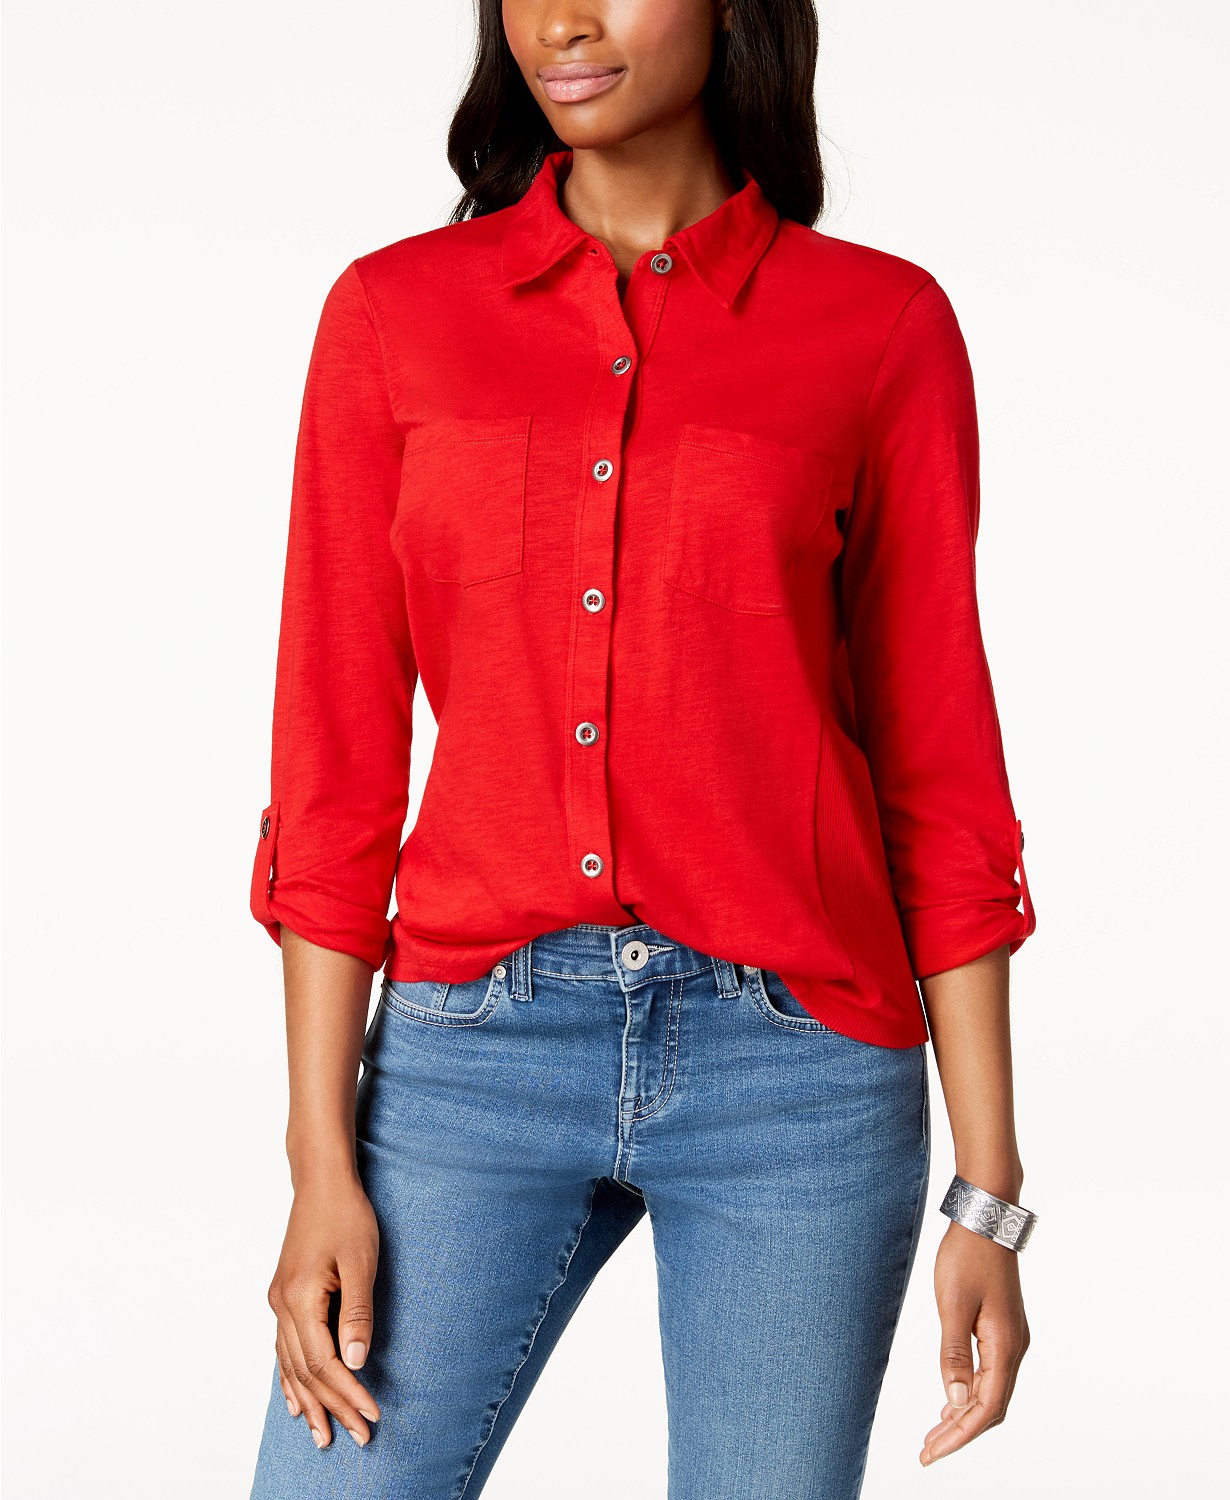 red button down long sleeve shirt